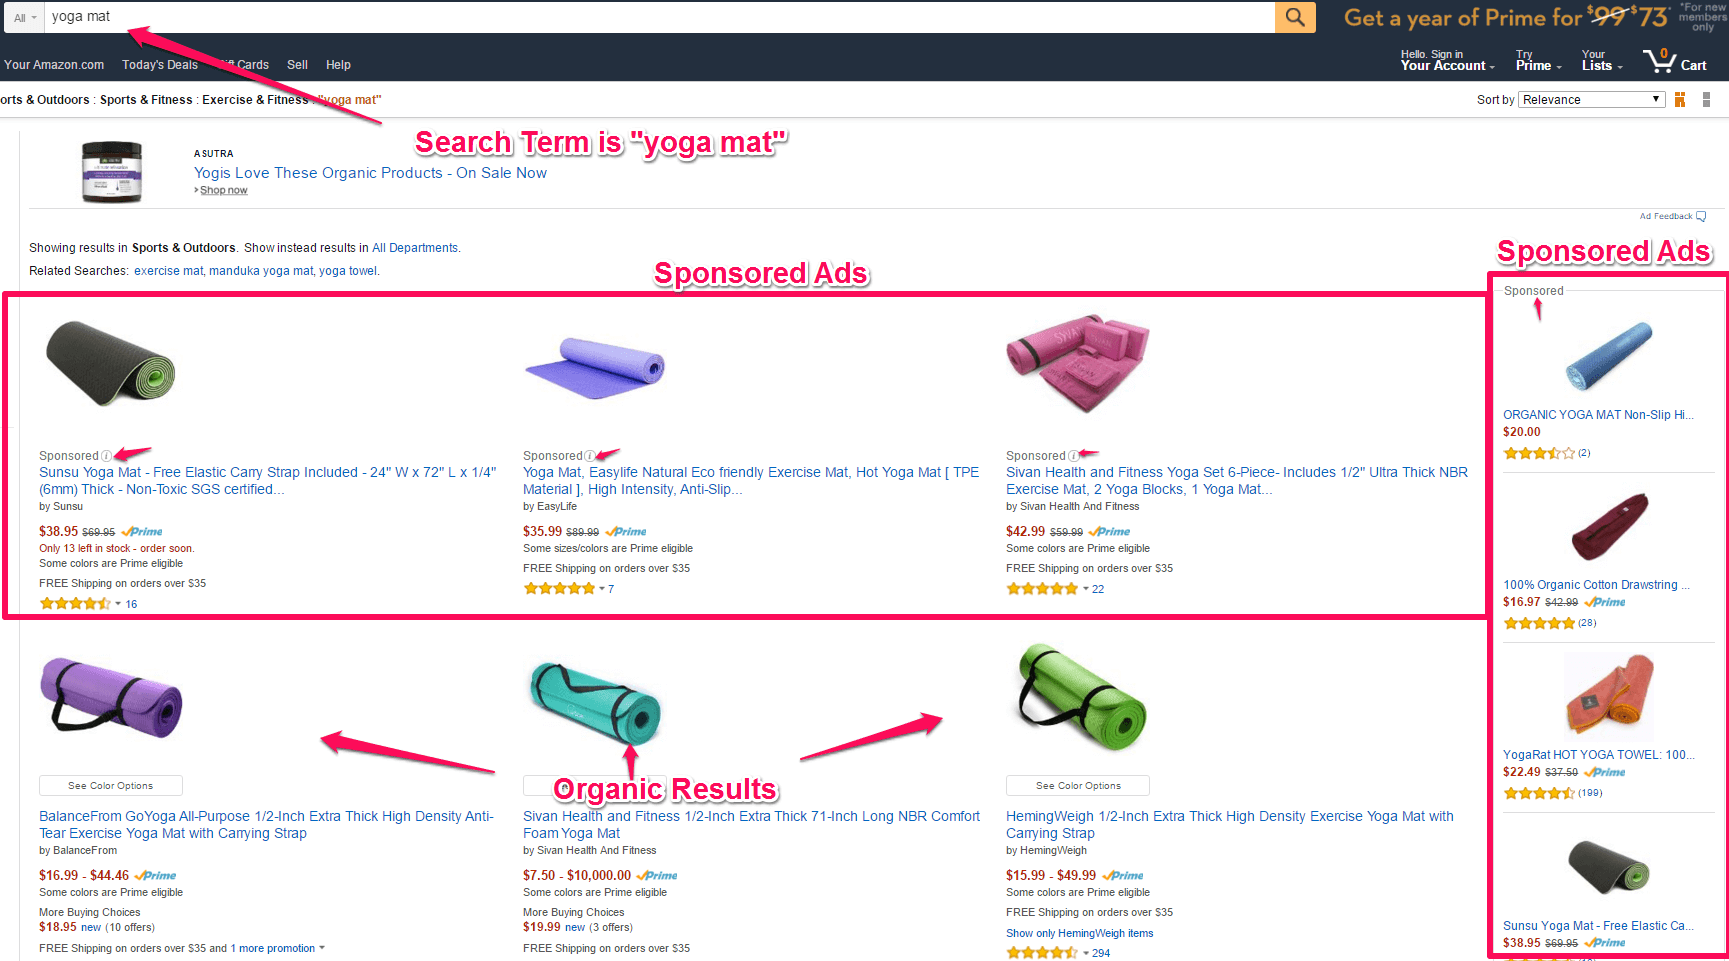 Amazon's Sponsored and Organic results